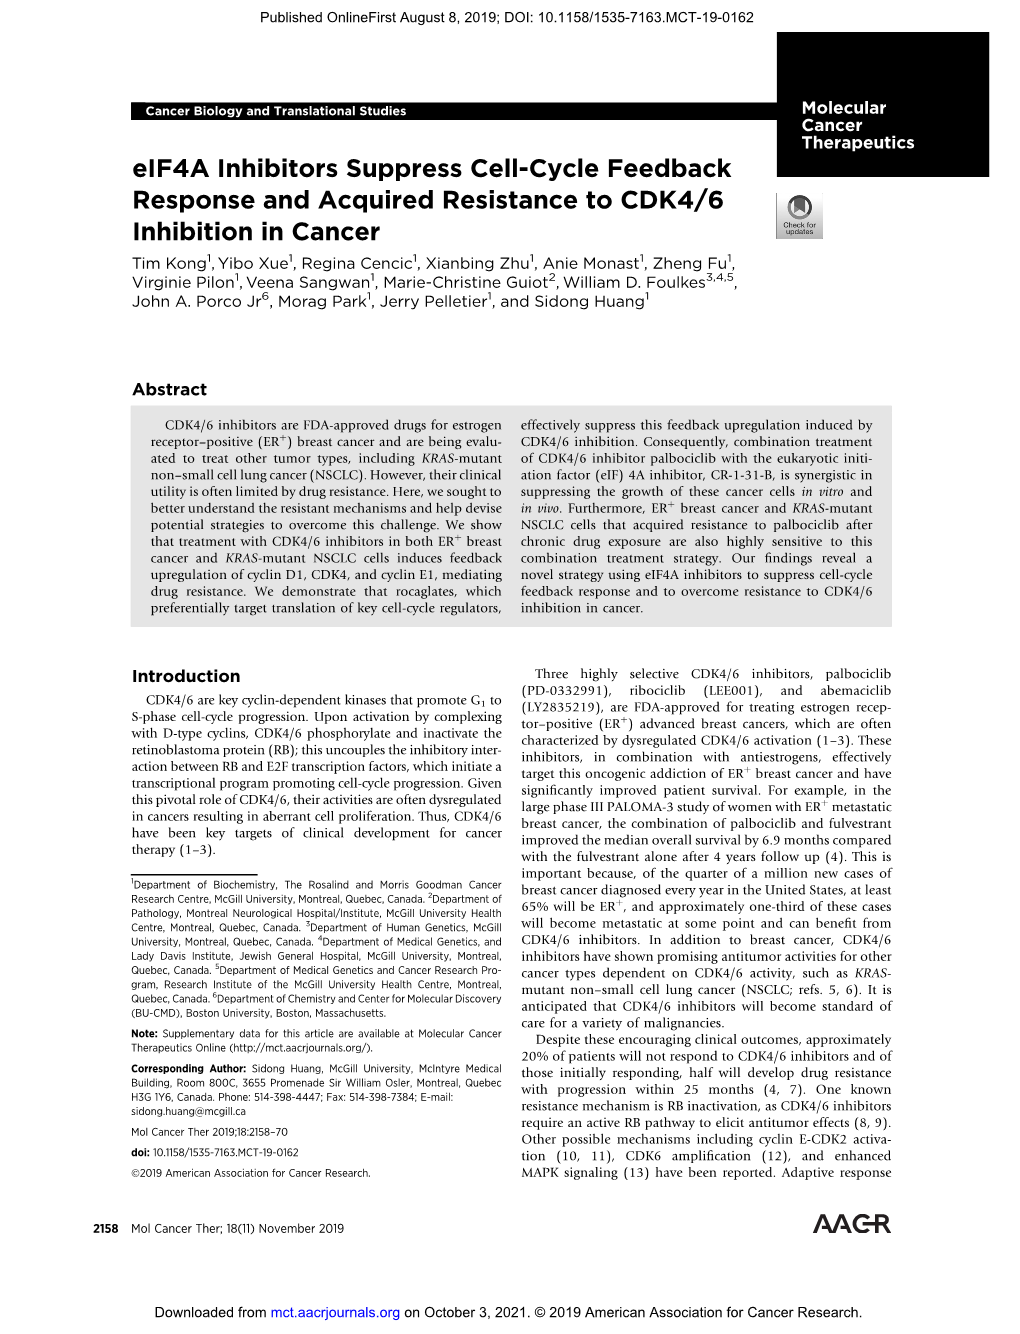 Eif4a Inhibitors Suppress Cell-Cycle Feedback Response and Acquired